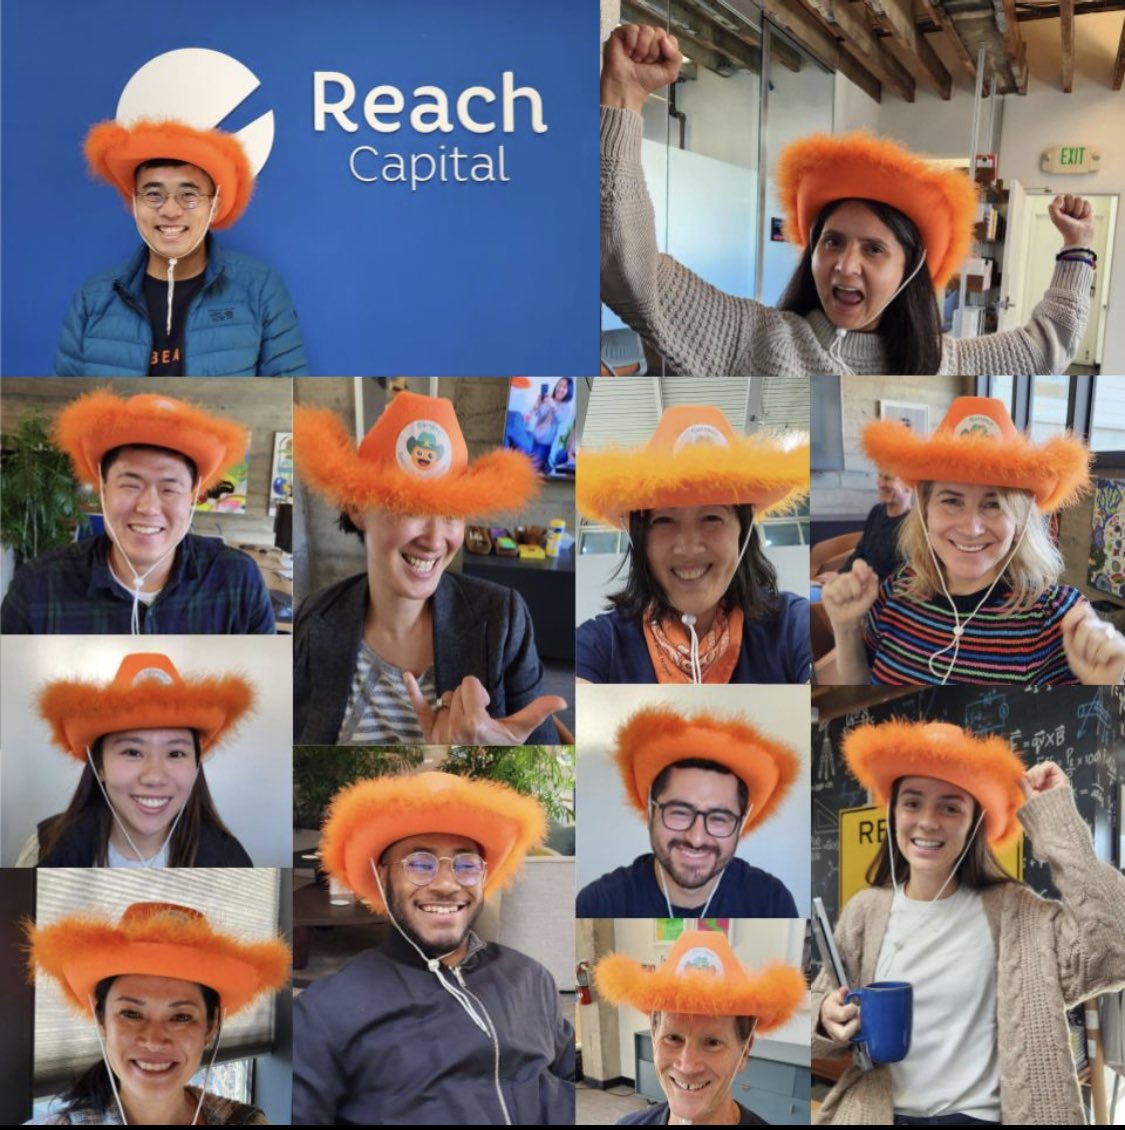 We love @reachfund 🧡 

Here they are helping us celebrate 3 million students in #ThinkOrange #CuriosityCowboy attire. 

I can’t think of a better group of investors: supportive, passionate about education, great advice, & fun!